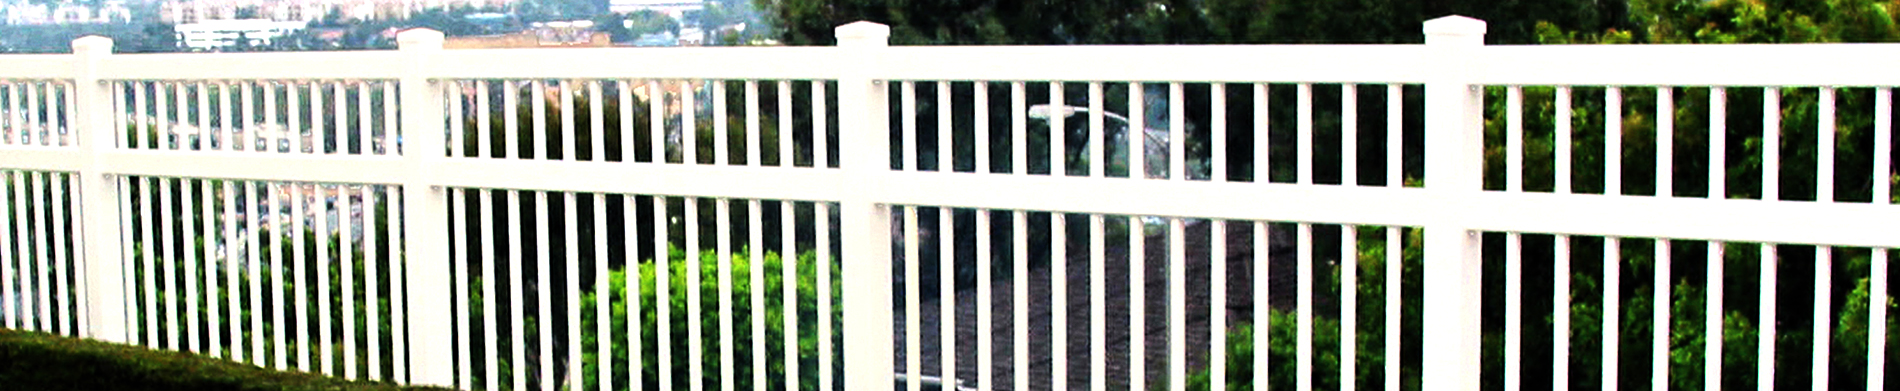 Choose Duramax Vinyl Fences to Add Sophistication to Your Property